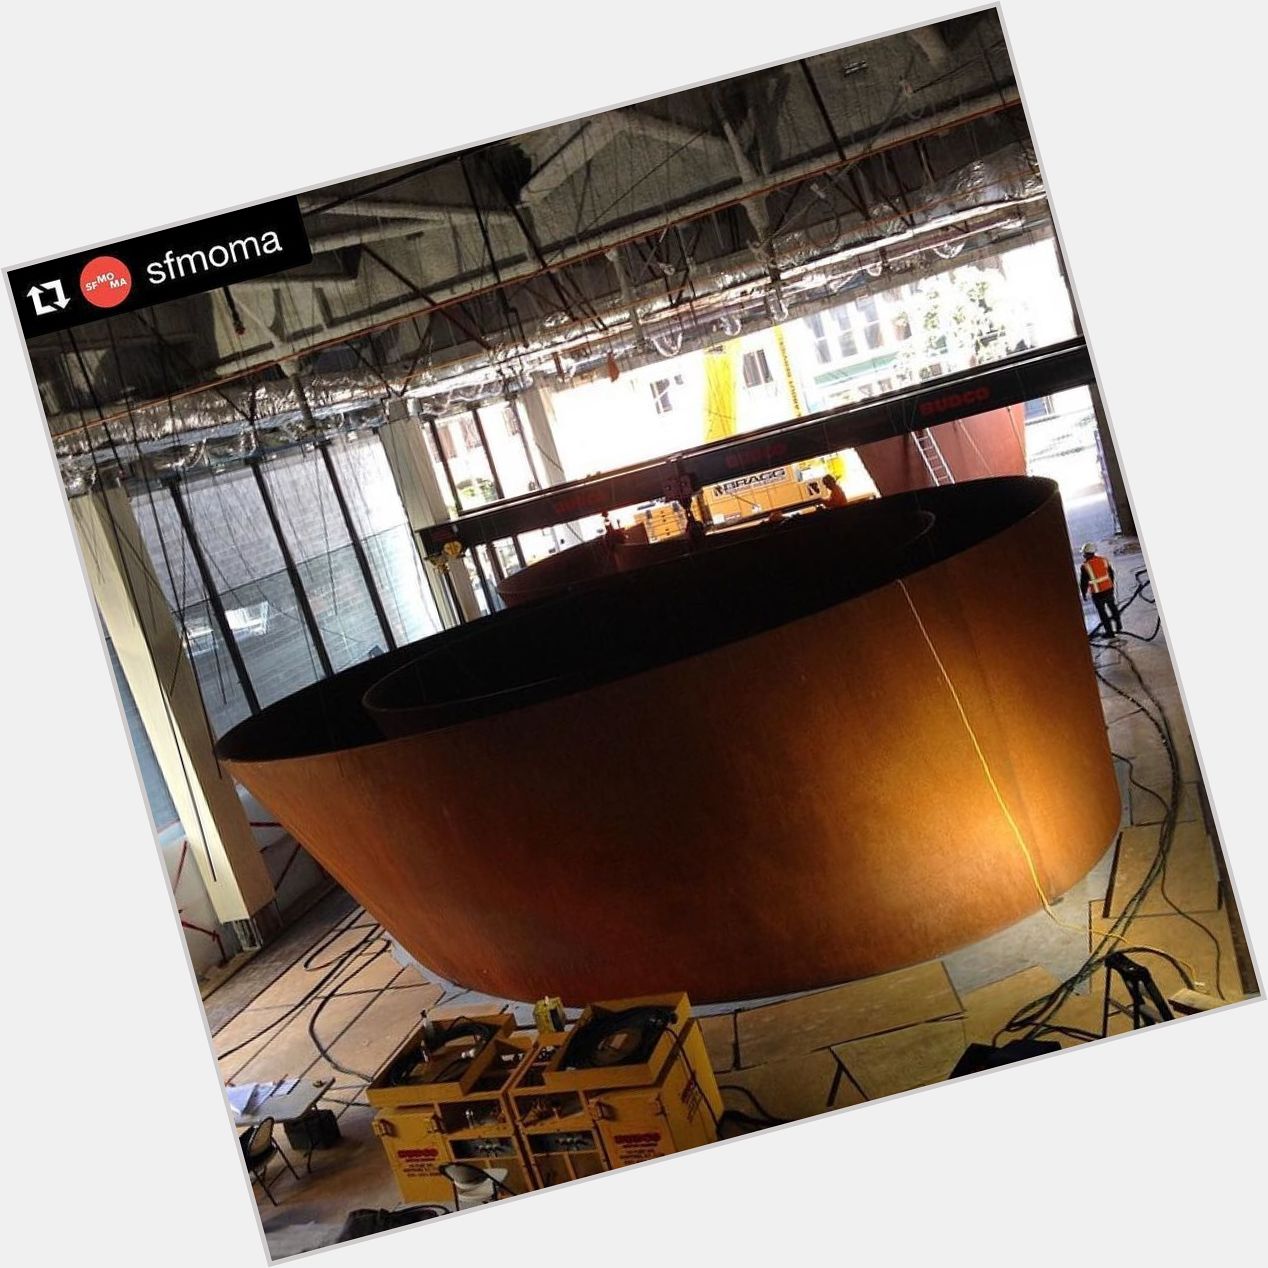 Happy birthday Richard Serra! We can\t wait to visit your giant sculpture in the brand new 